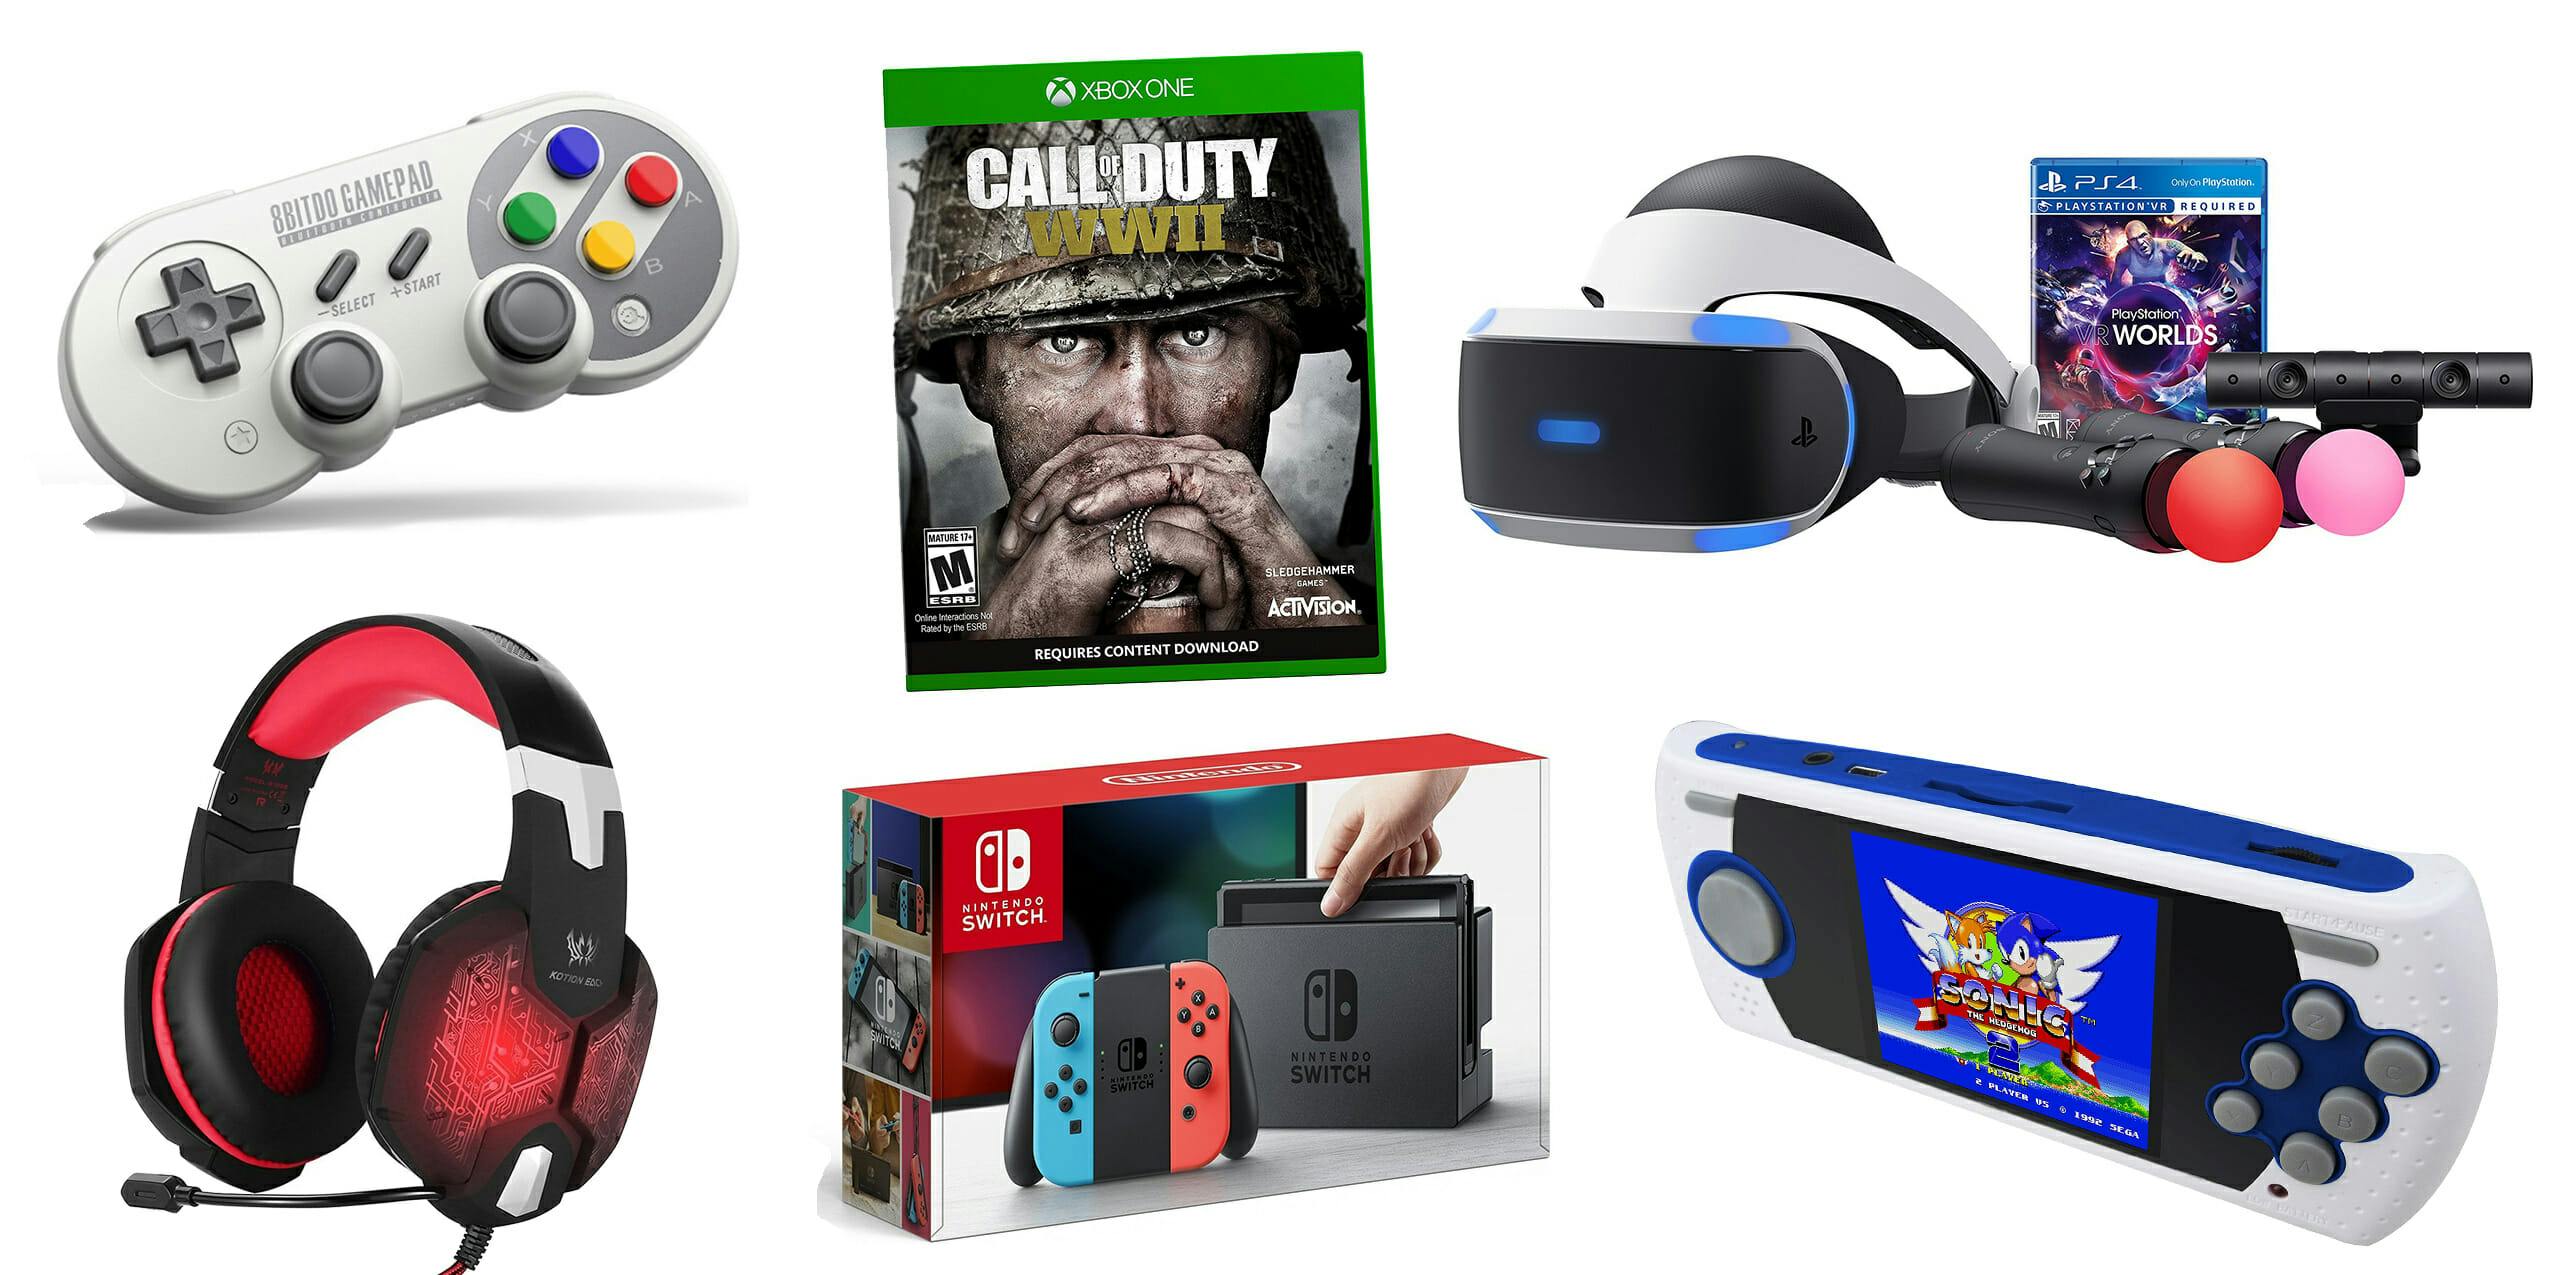 20 gifts for gamers that will score big on Christmas